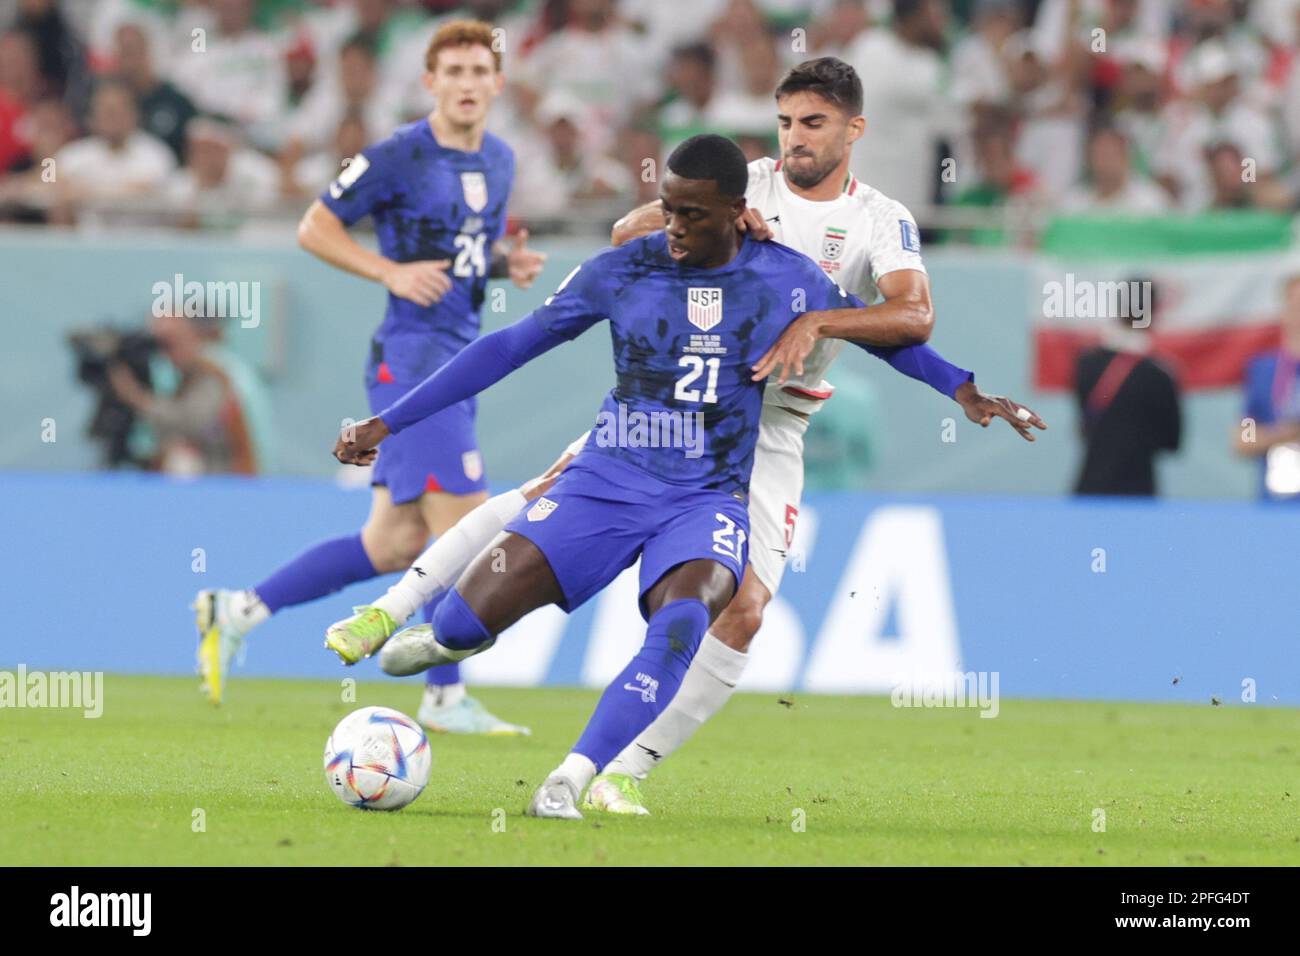 Timothy Weah of USA (L) and Milad Mohammadi (R) of Iran in action during the FIFA World Cup Qatar 2022 Match between IR Iran and USA at Al Thumama Stadium. Final score; IR Iran 0:1 USA. Stock Photo